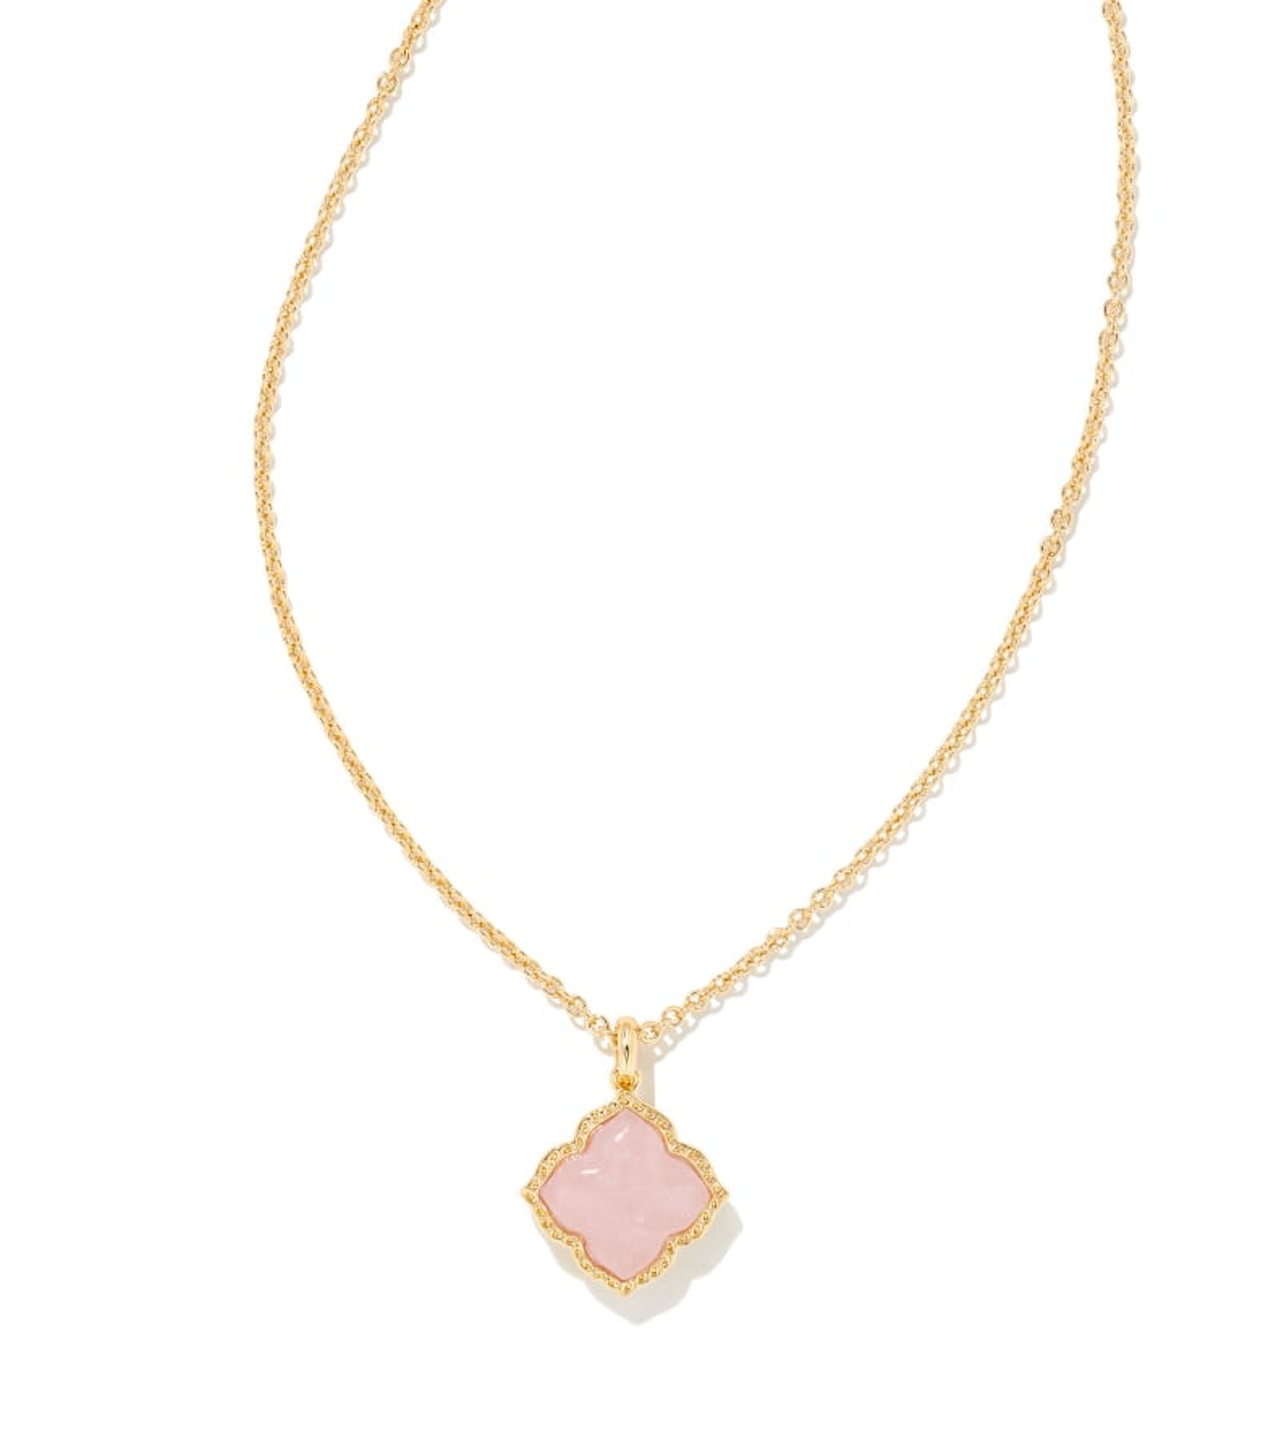 Shop Pink with Kendra Scott: Top jewelry picks to benefit breast cancer research